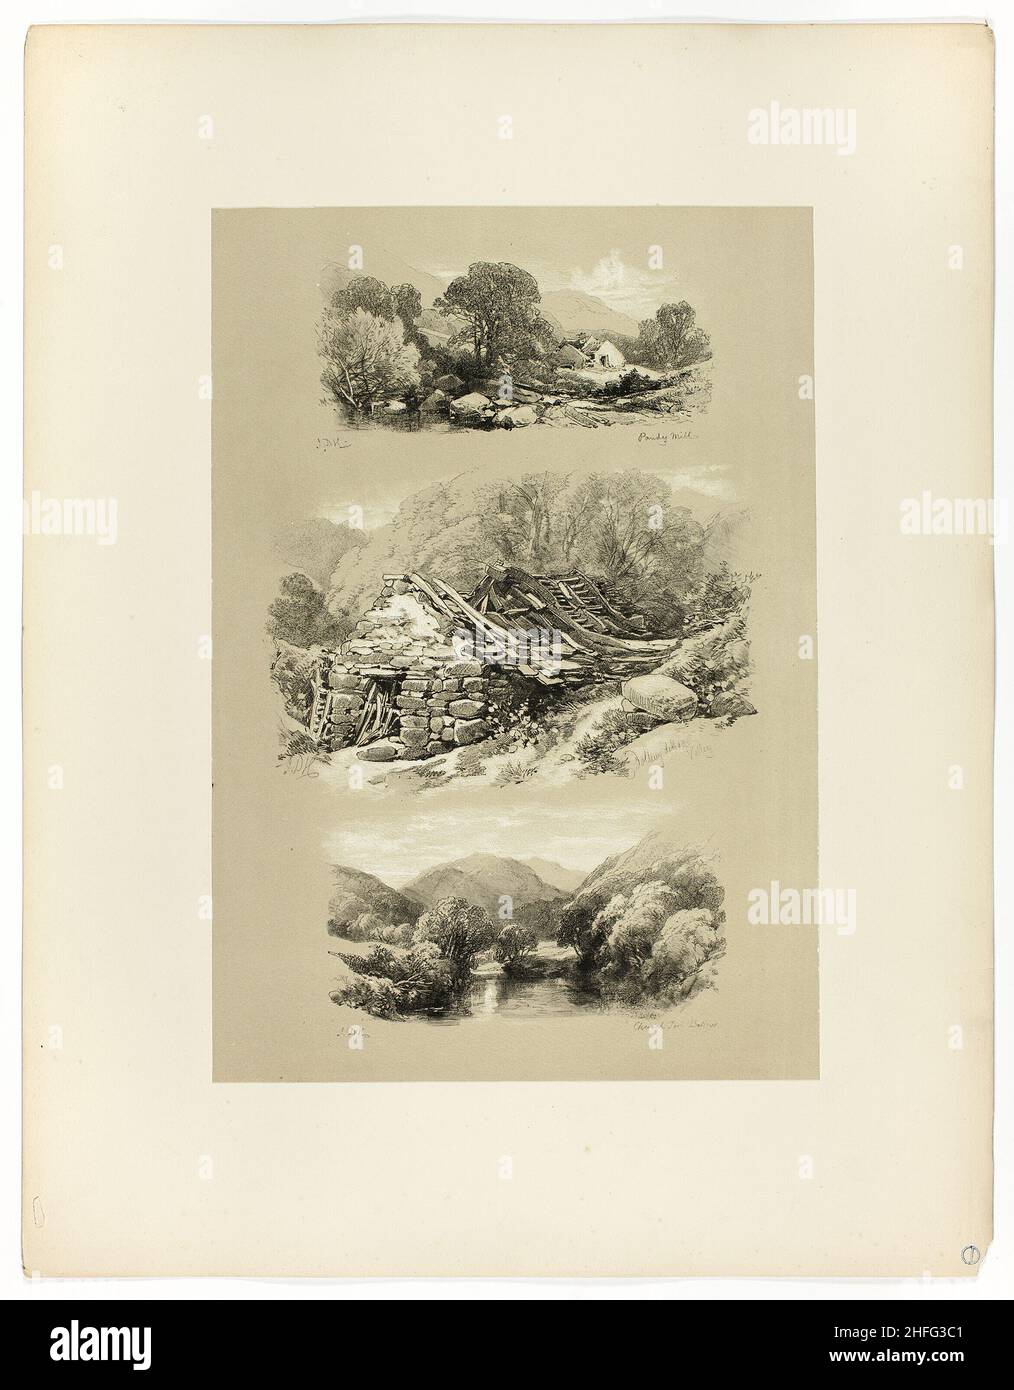 Pandy Mill, Church Pool, and one other subject, from Picturesque Selections, c. 1860. Stock Photo